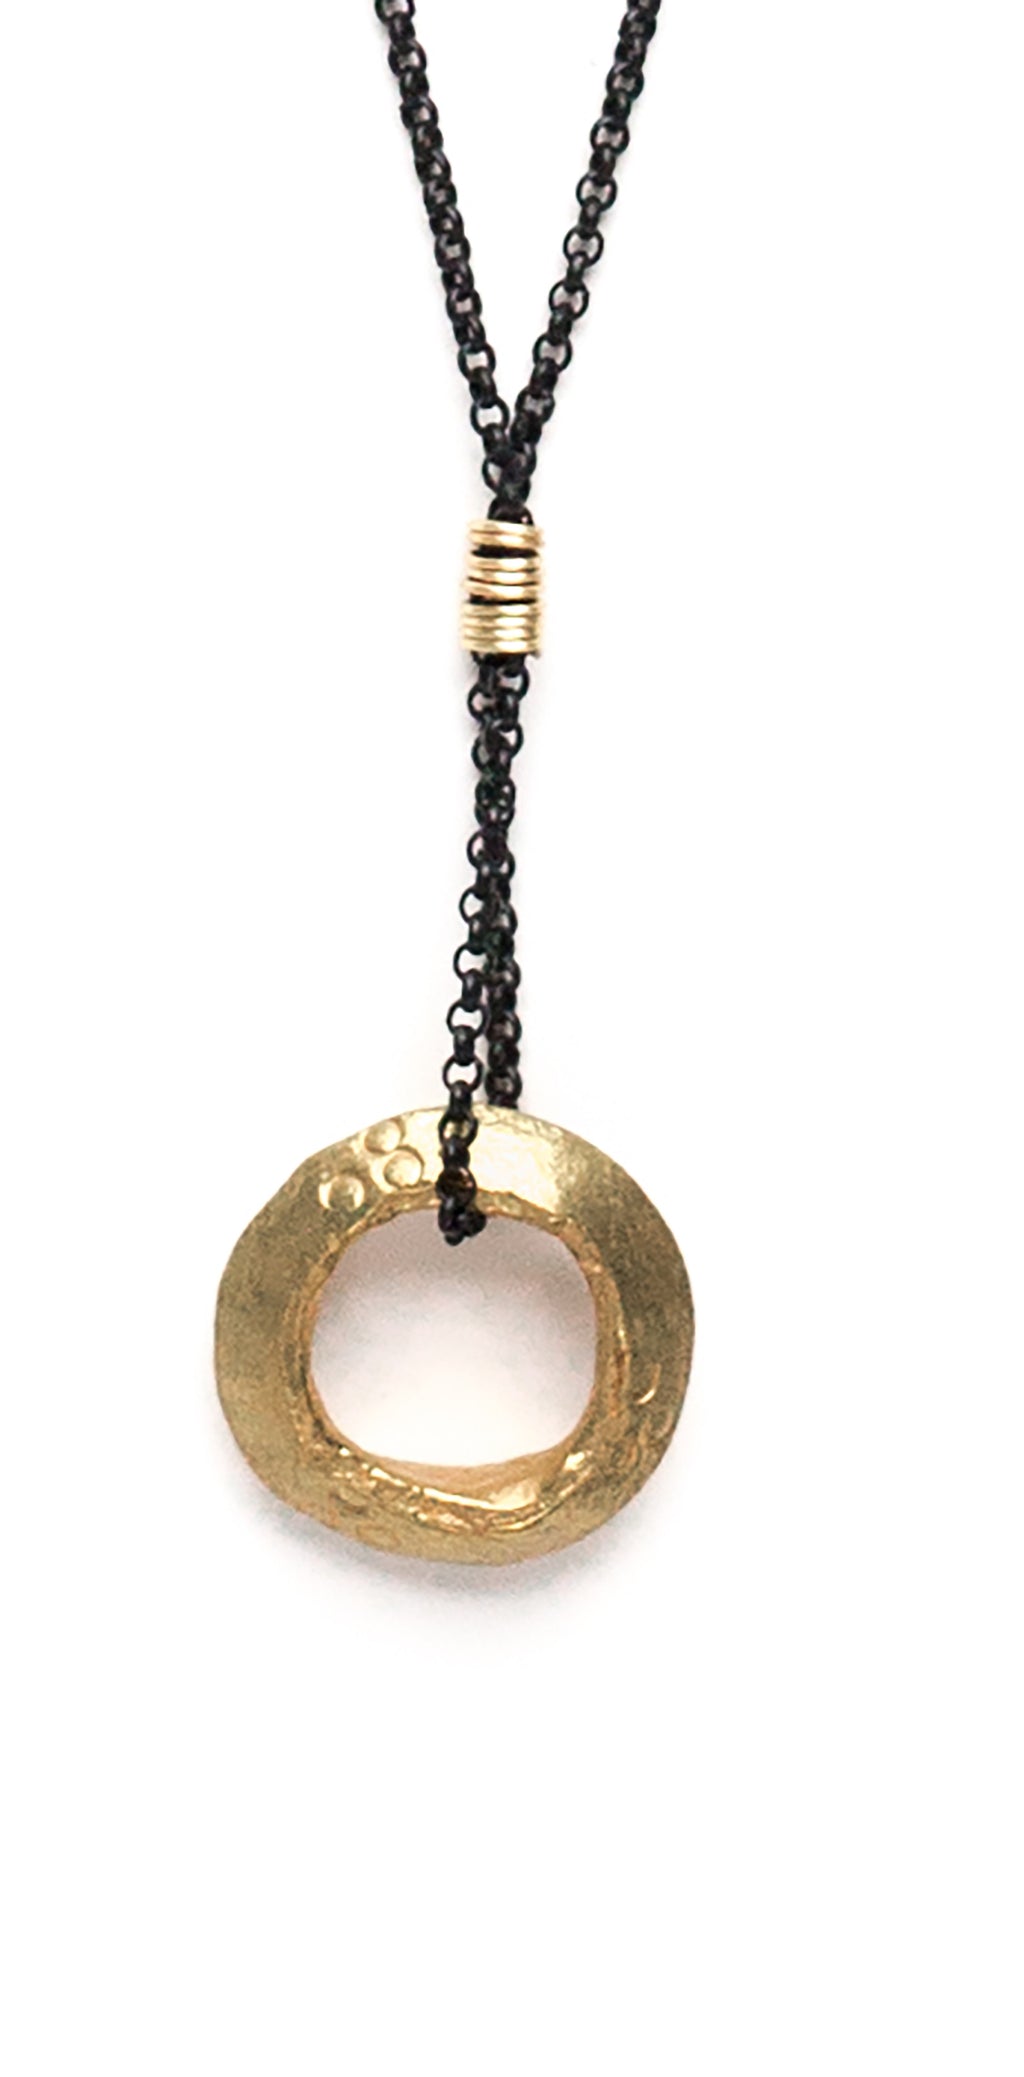 Golden Ethiopian Ring Necklace on Black Chain